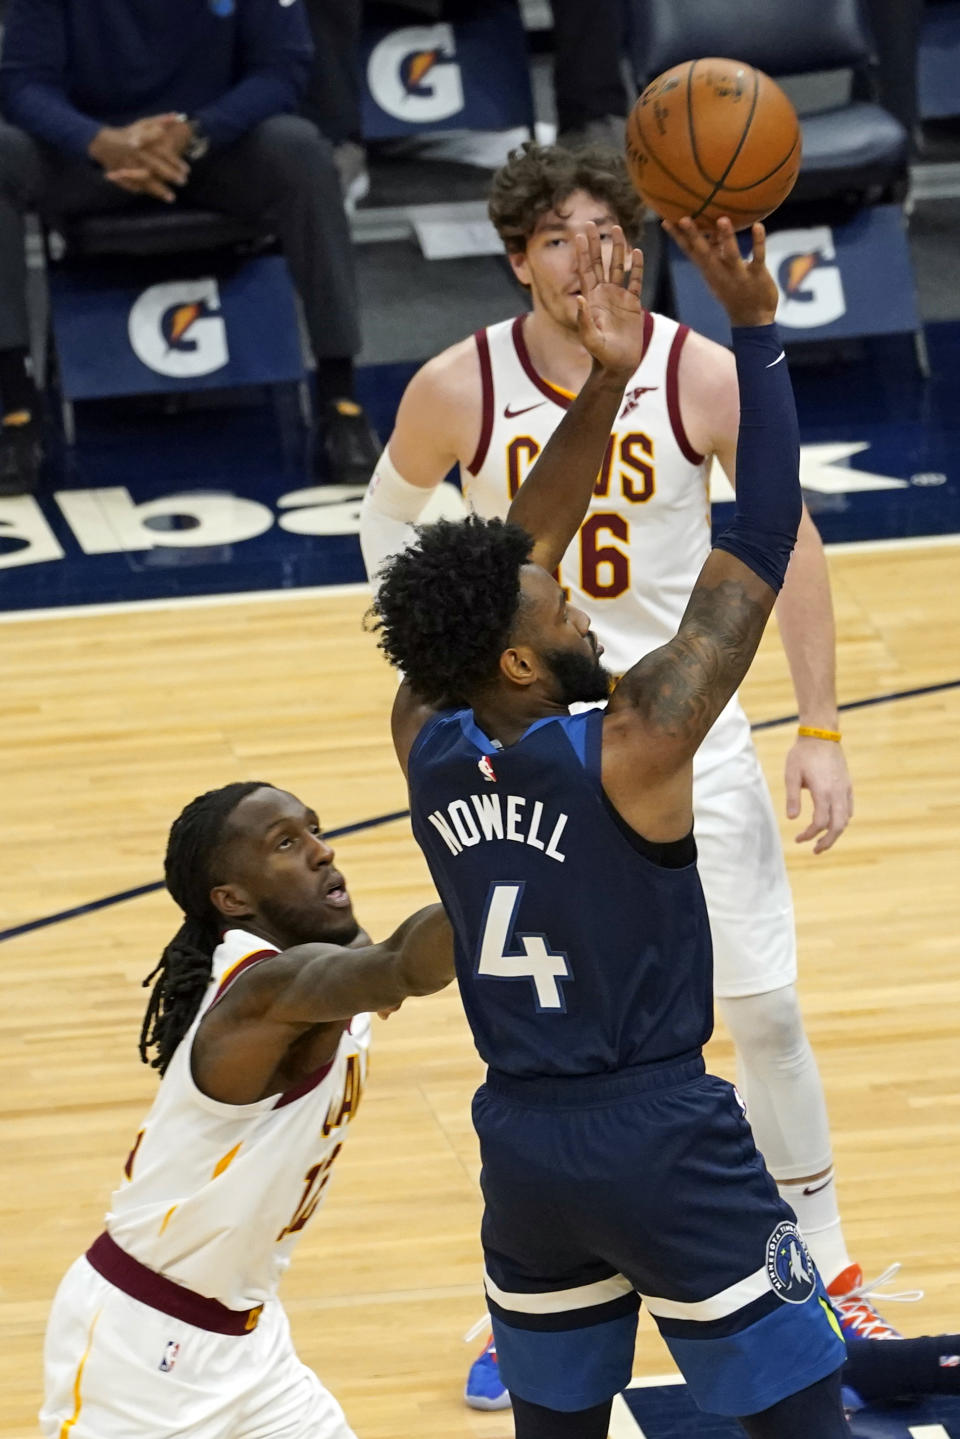 Minnesota Timberwolves' Jaylen Nowell (4) shoots as Cleveland Cavaliers' Taurean Prince, left, defends in the first half of an NBA basketball game Sunday, Jan. 31, 2021, in Minneapolis. (AP Photo/Jim Mone)